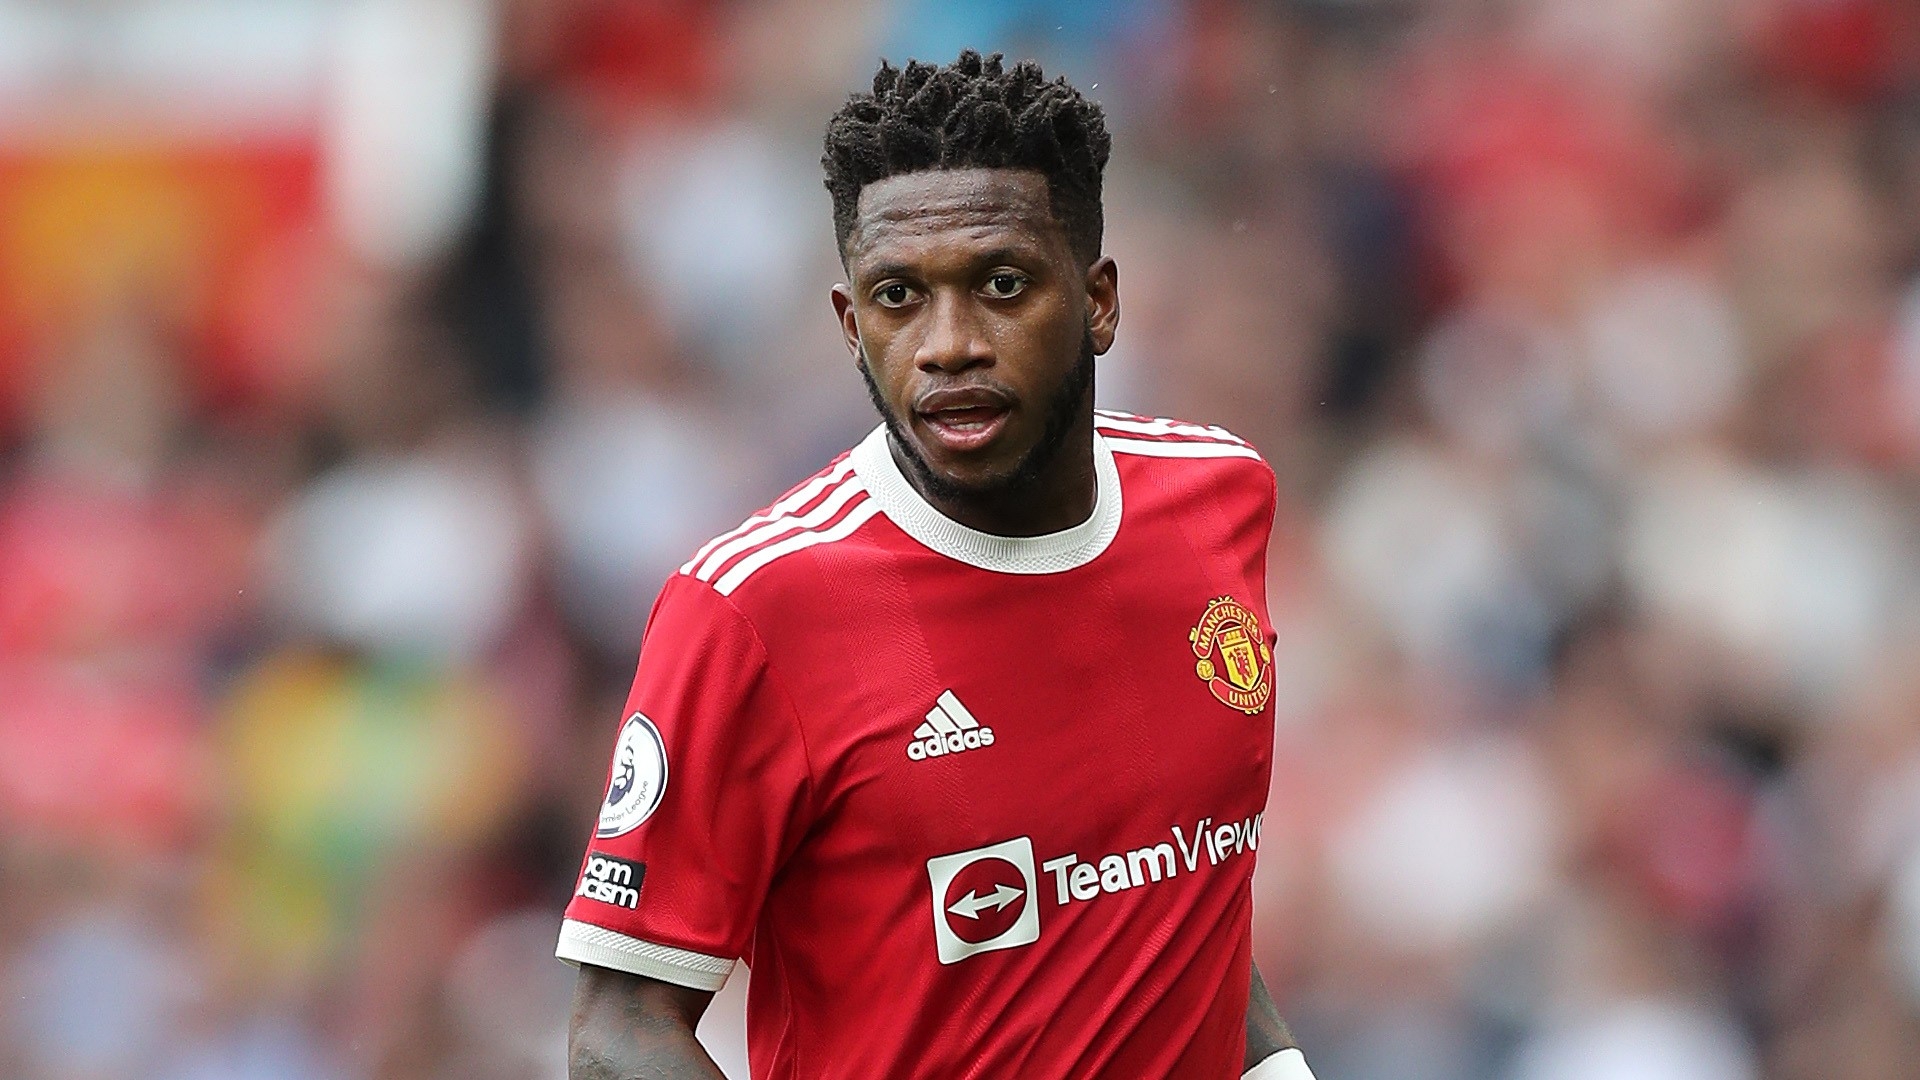 Fred brings more than people realise&#39; - Under-fire Manchester United midfielder backed by Silvestre | Goal.com